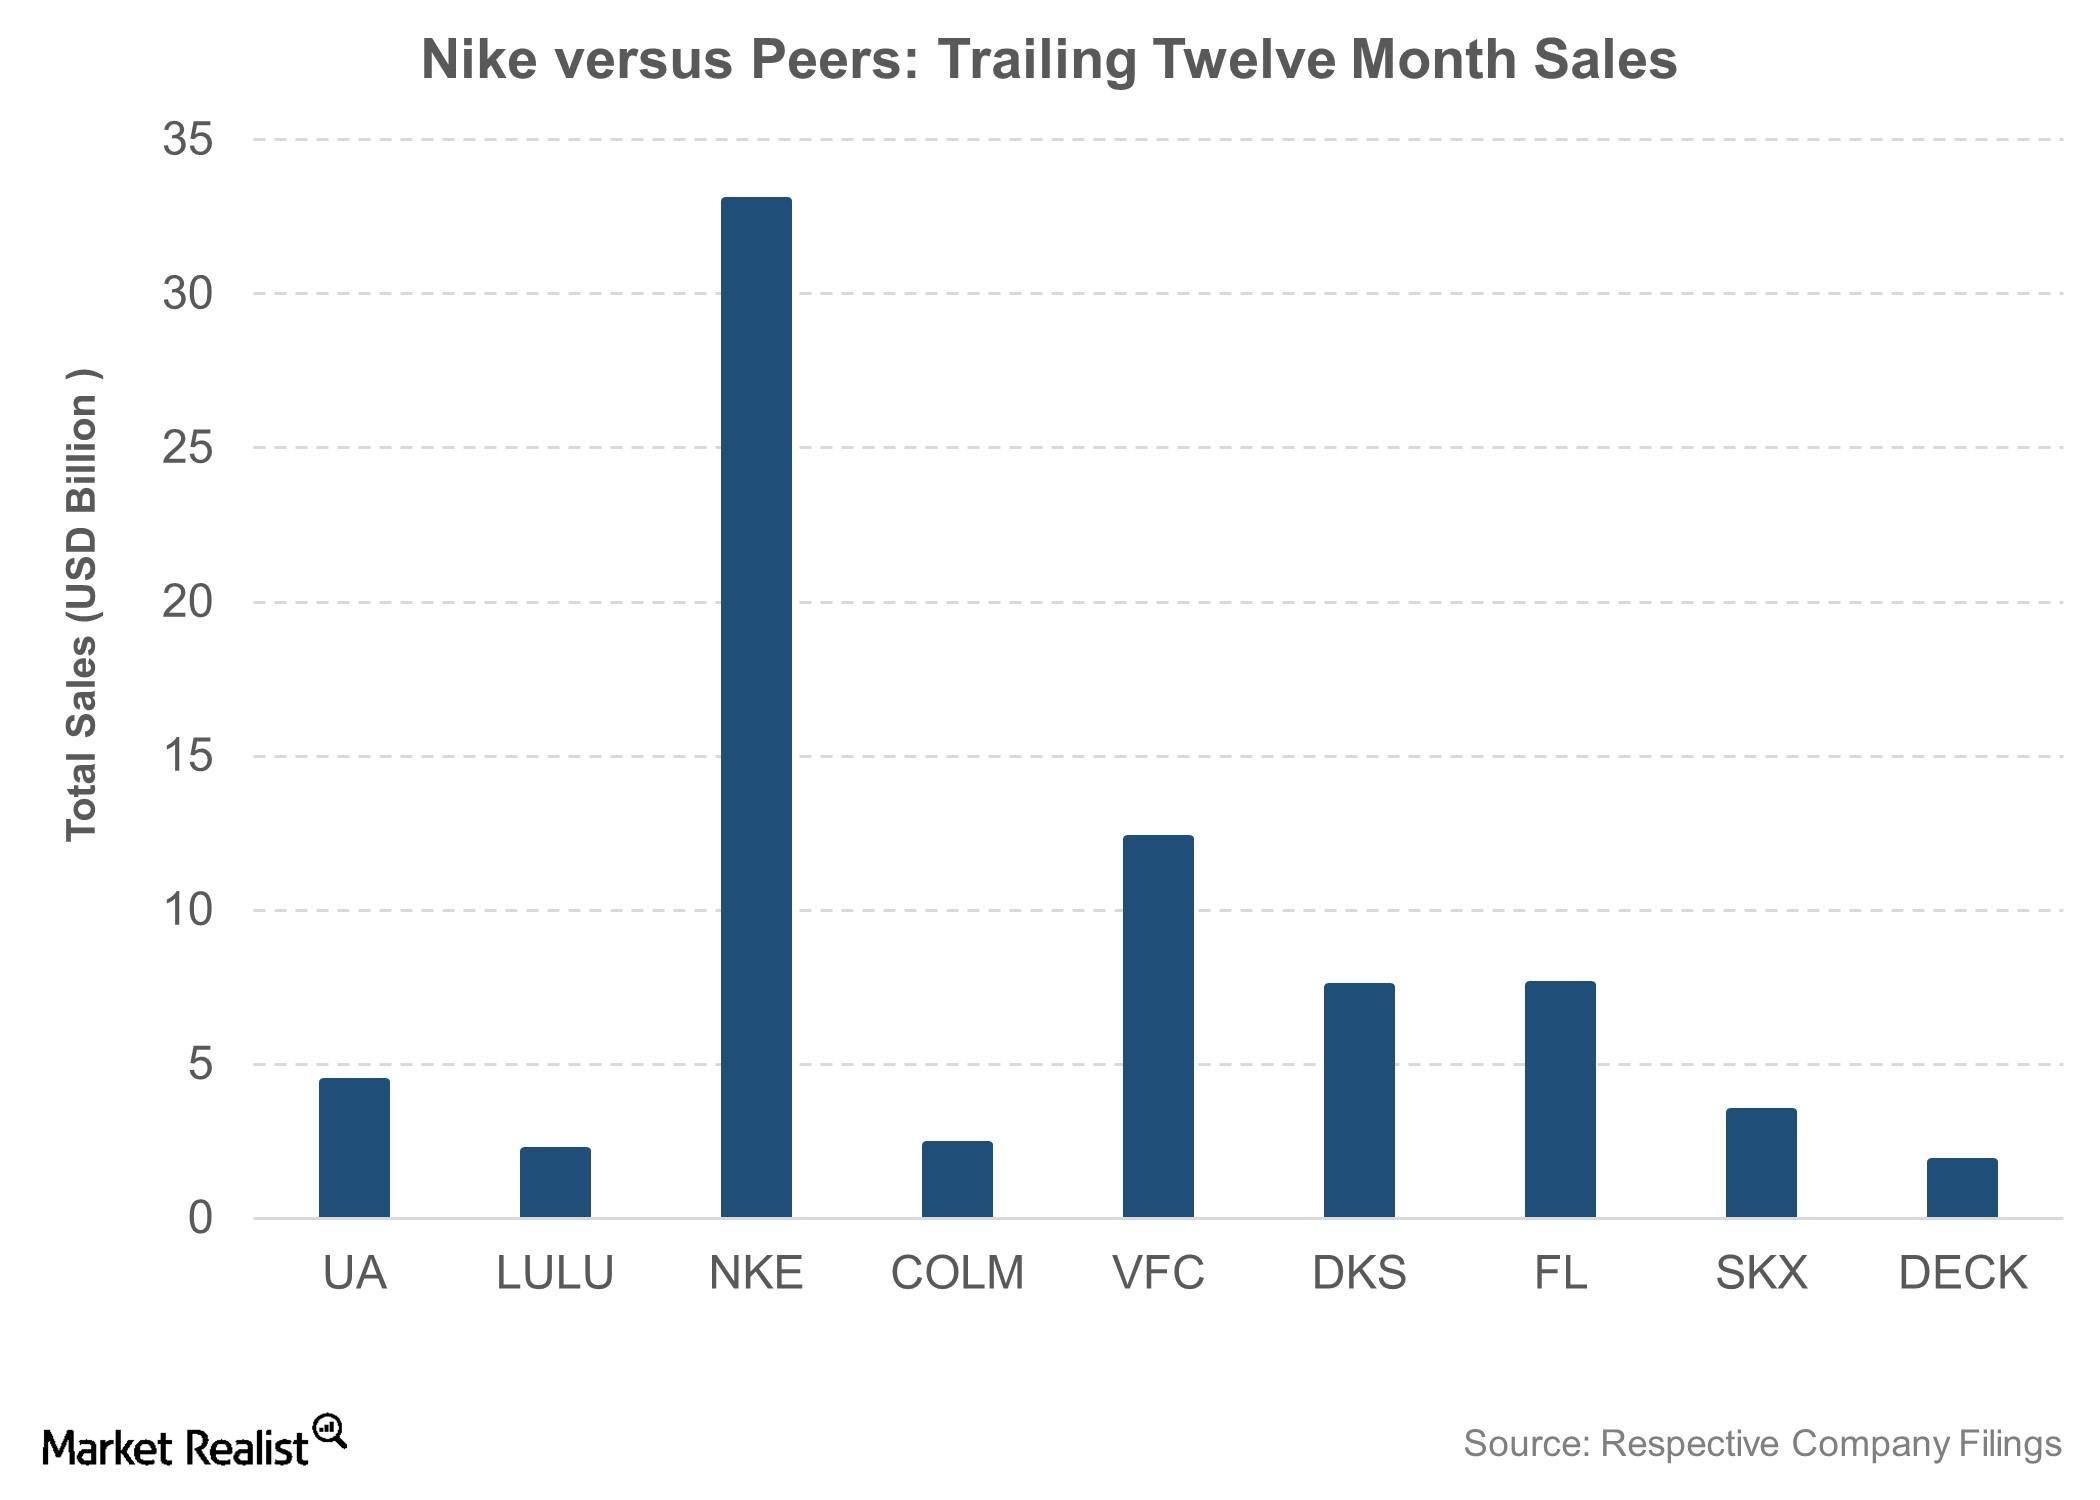 Who's a Bite Out of Nike's Market Share?